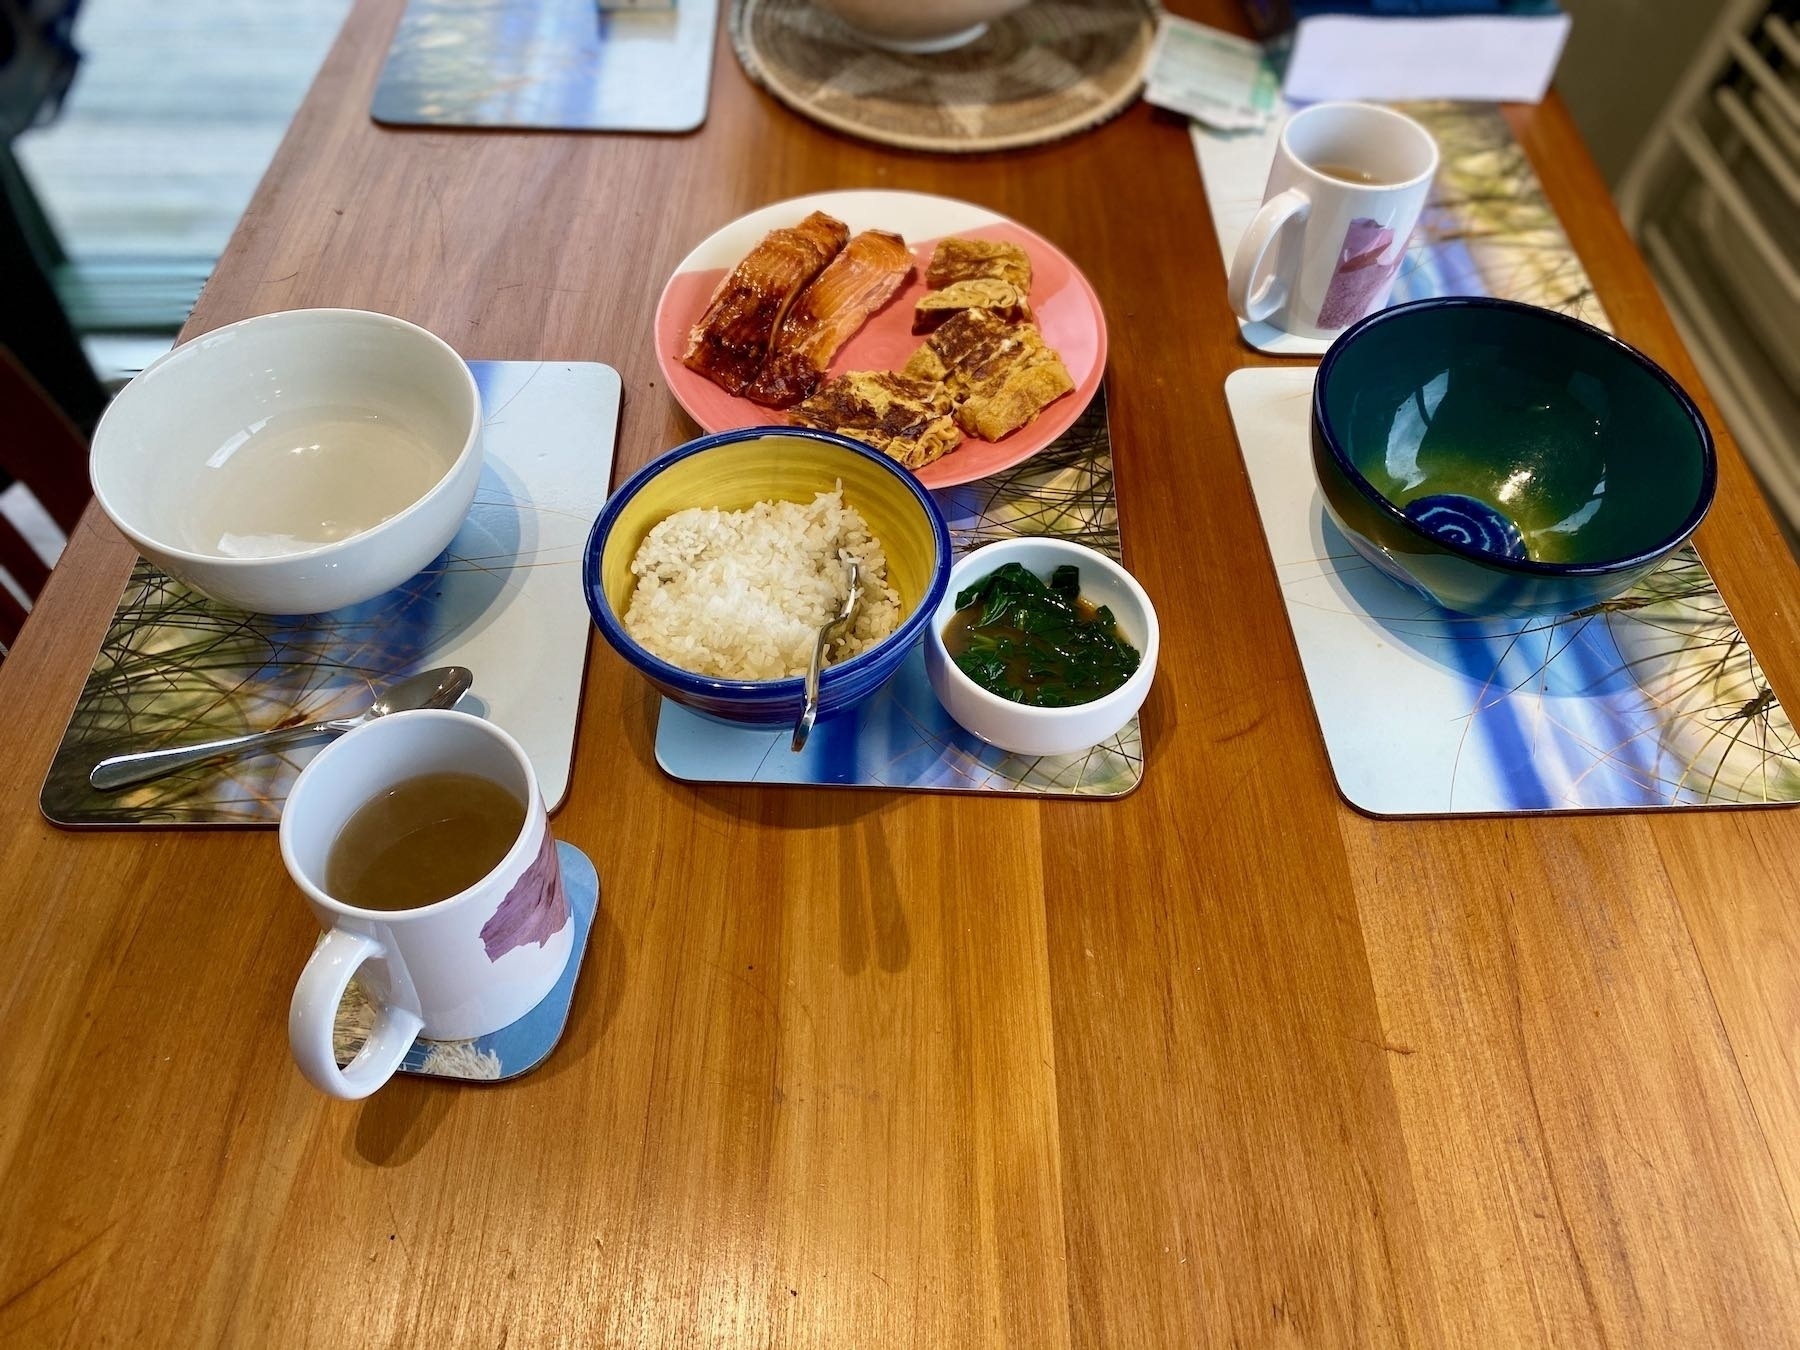 Rice, spinach, salmon, omelette, miso. 